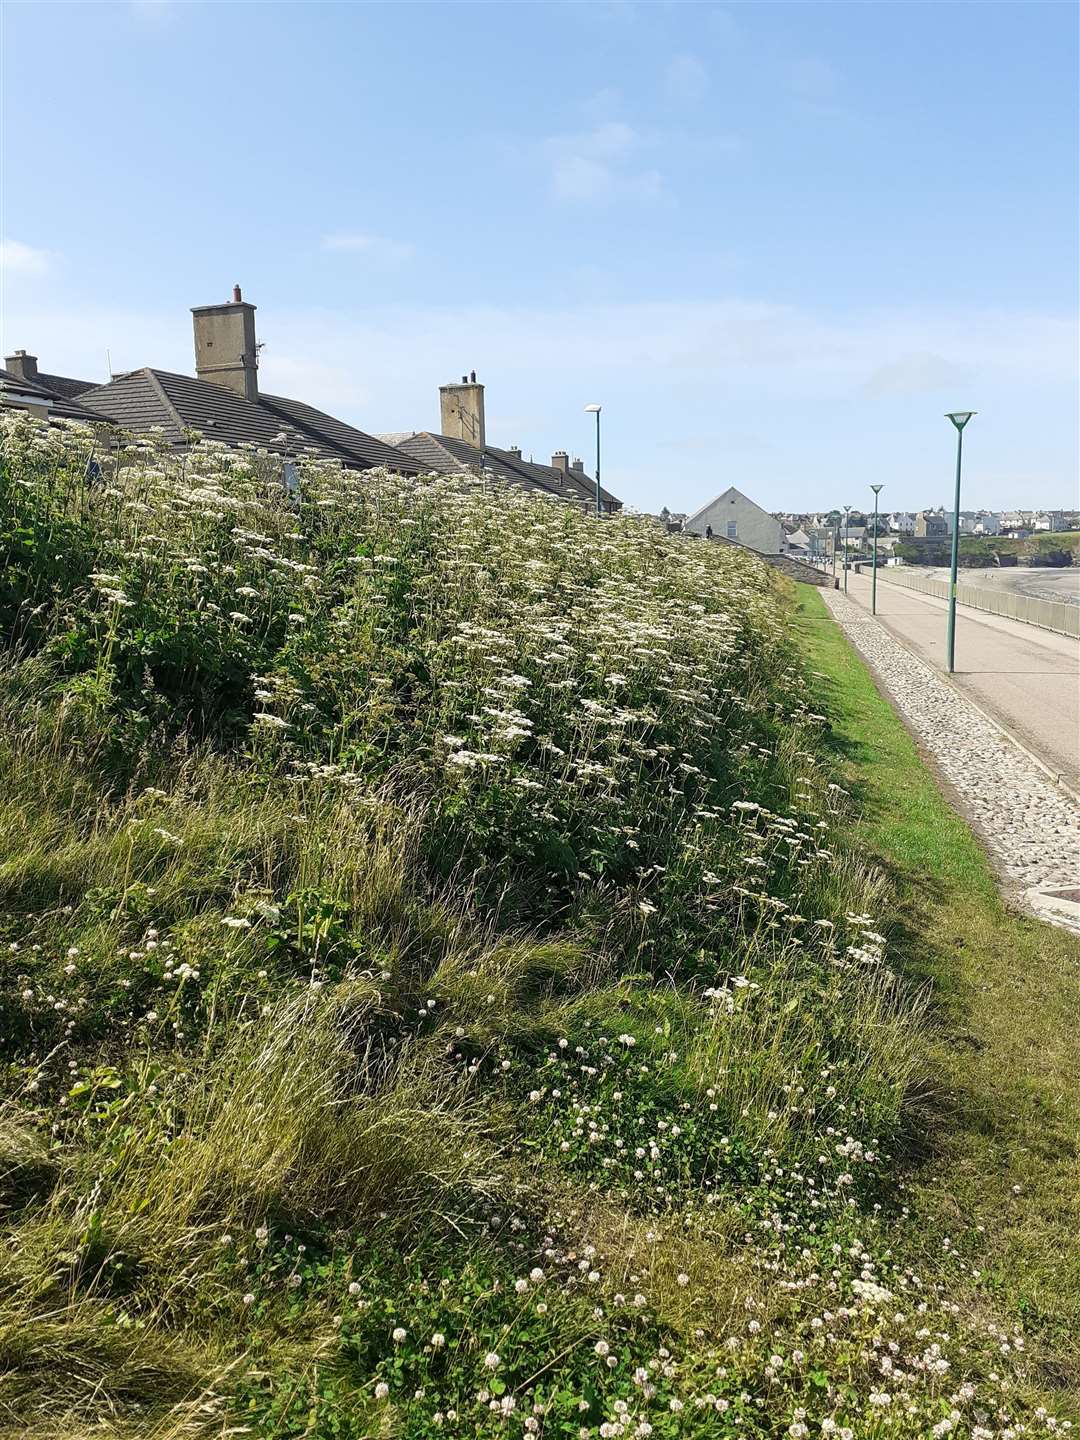 Weeds earlier this year on the embankment at the Esplanade in Thurso. Local green-fingered activist Alexander Glasgow thinks sea holly would be a suitable plant for this area.